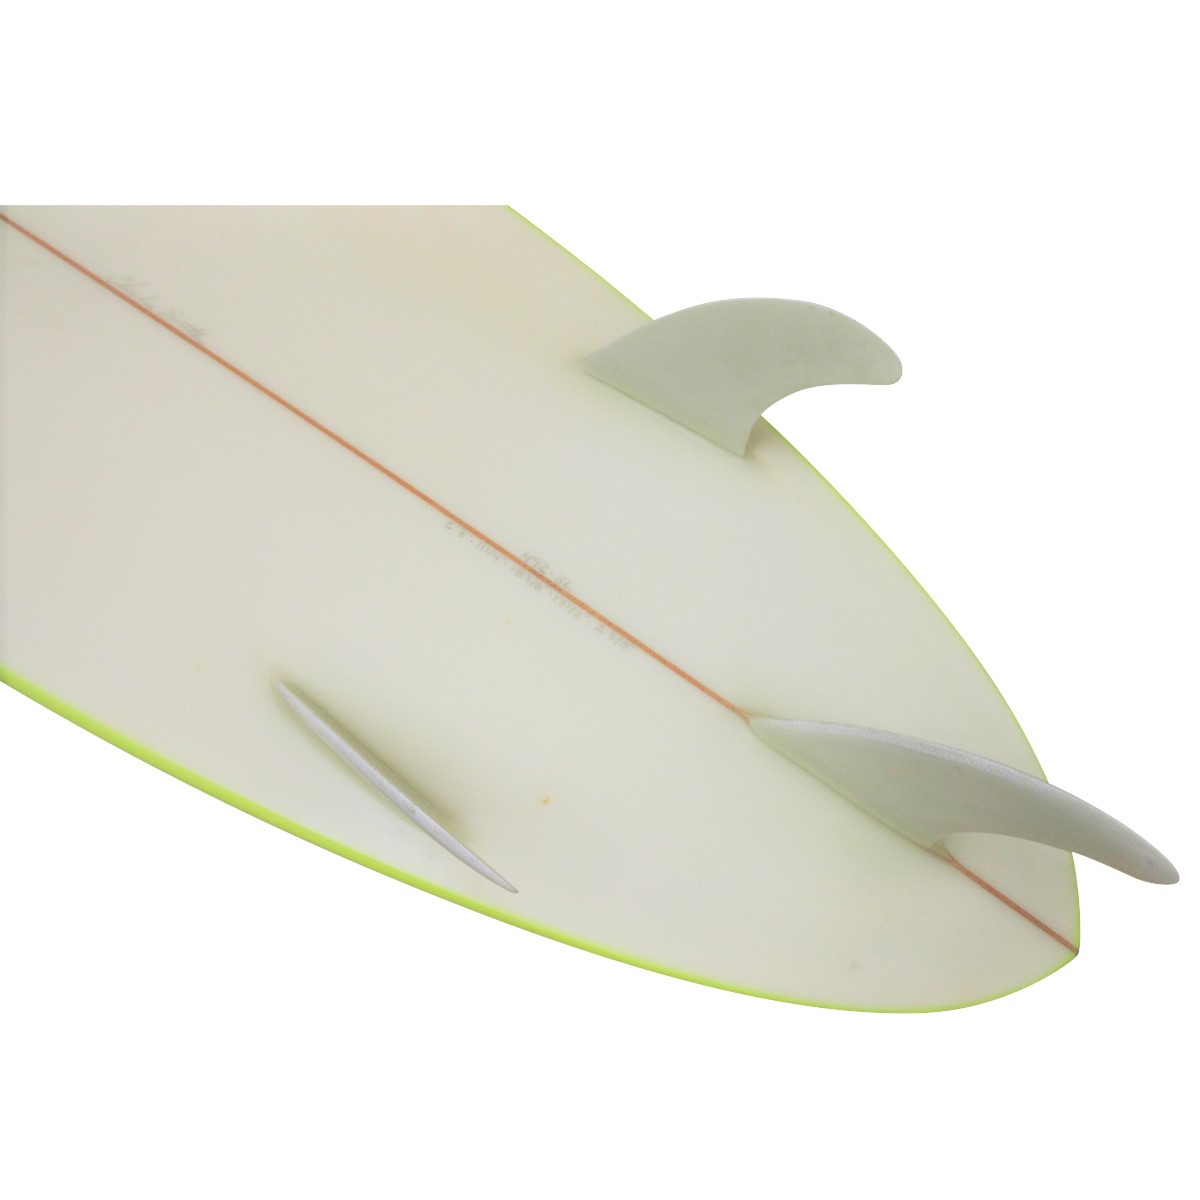 LOCAL MOTION / Retro Thruster 6`3 Shaped by Charlie Smith